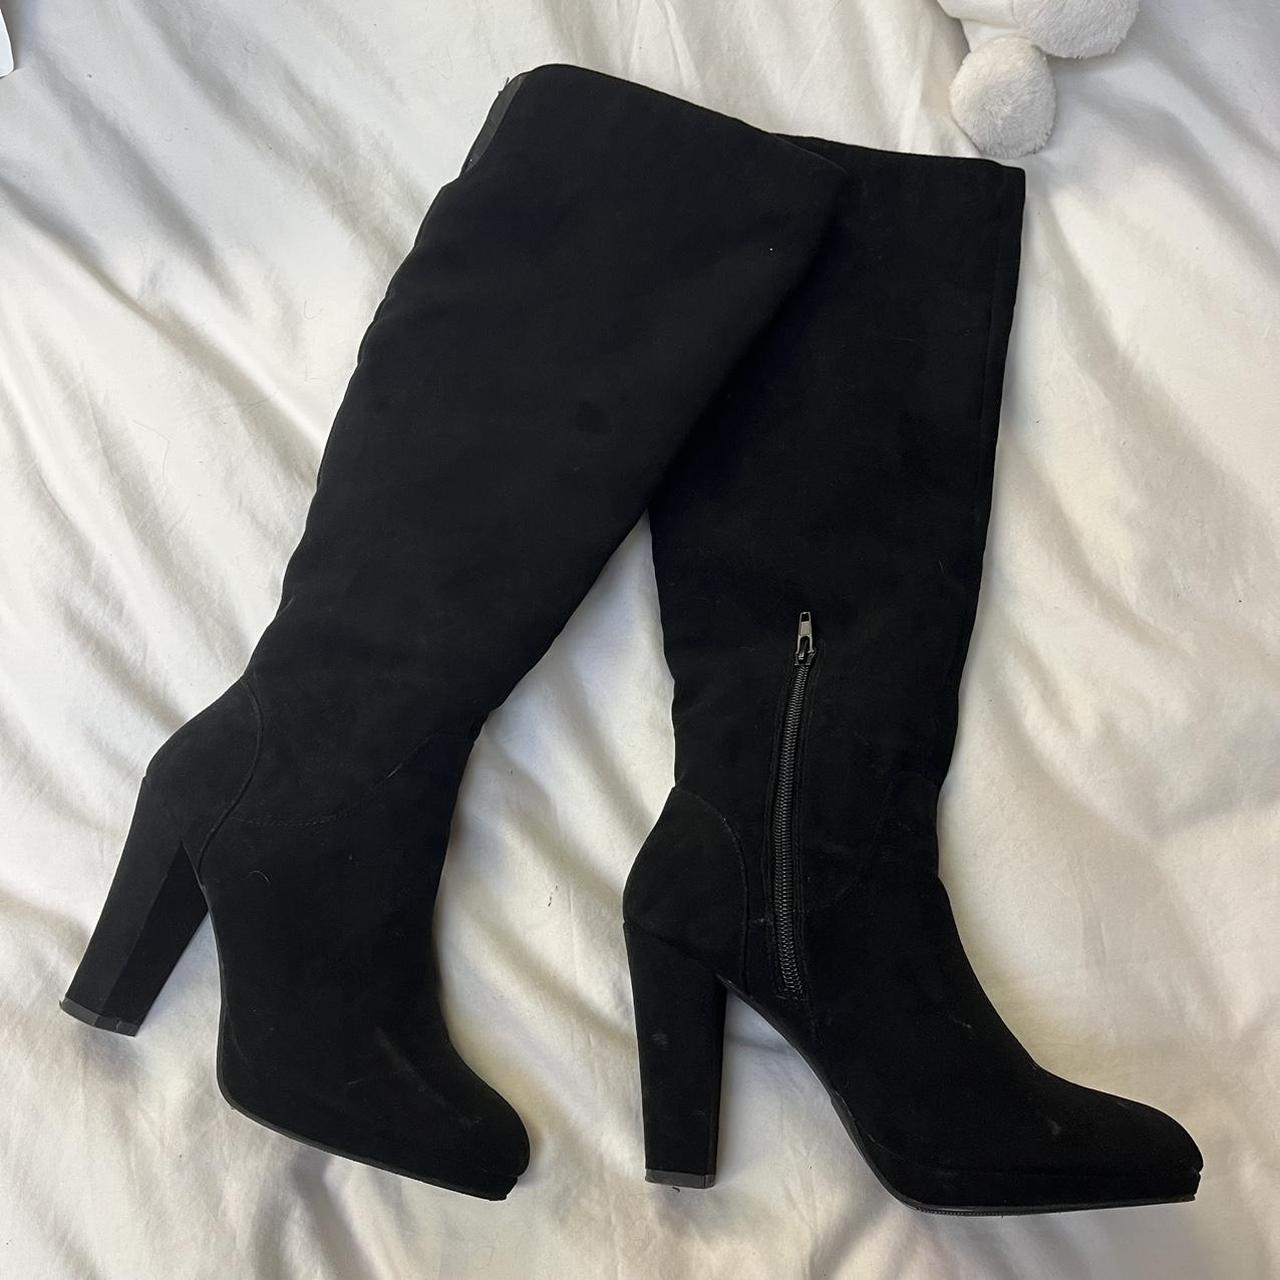 Bakers Black suede and rabbit fur boots. Size: - Depop